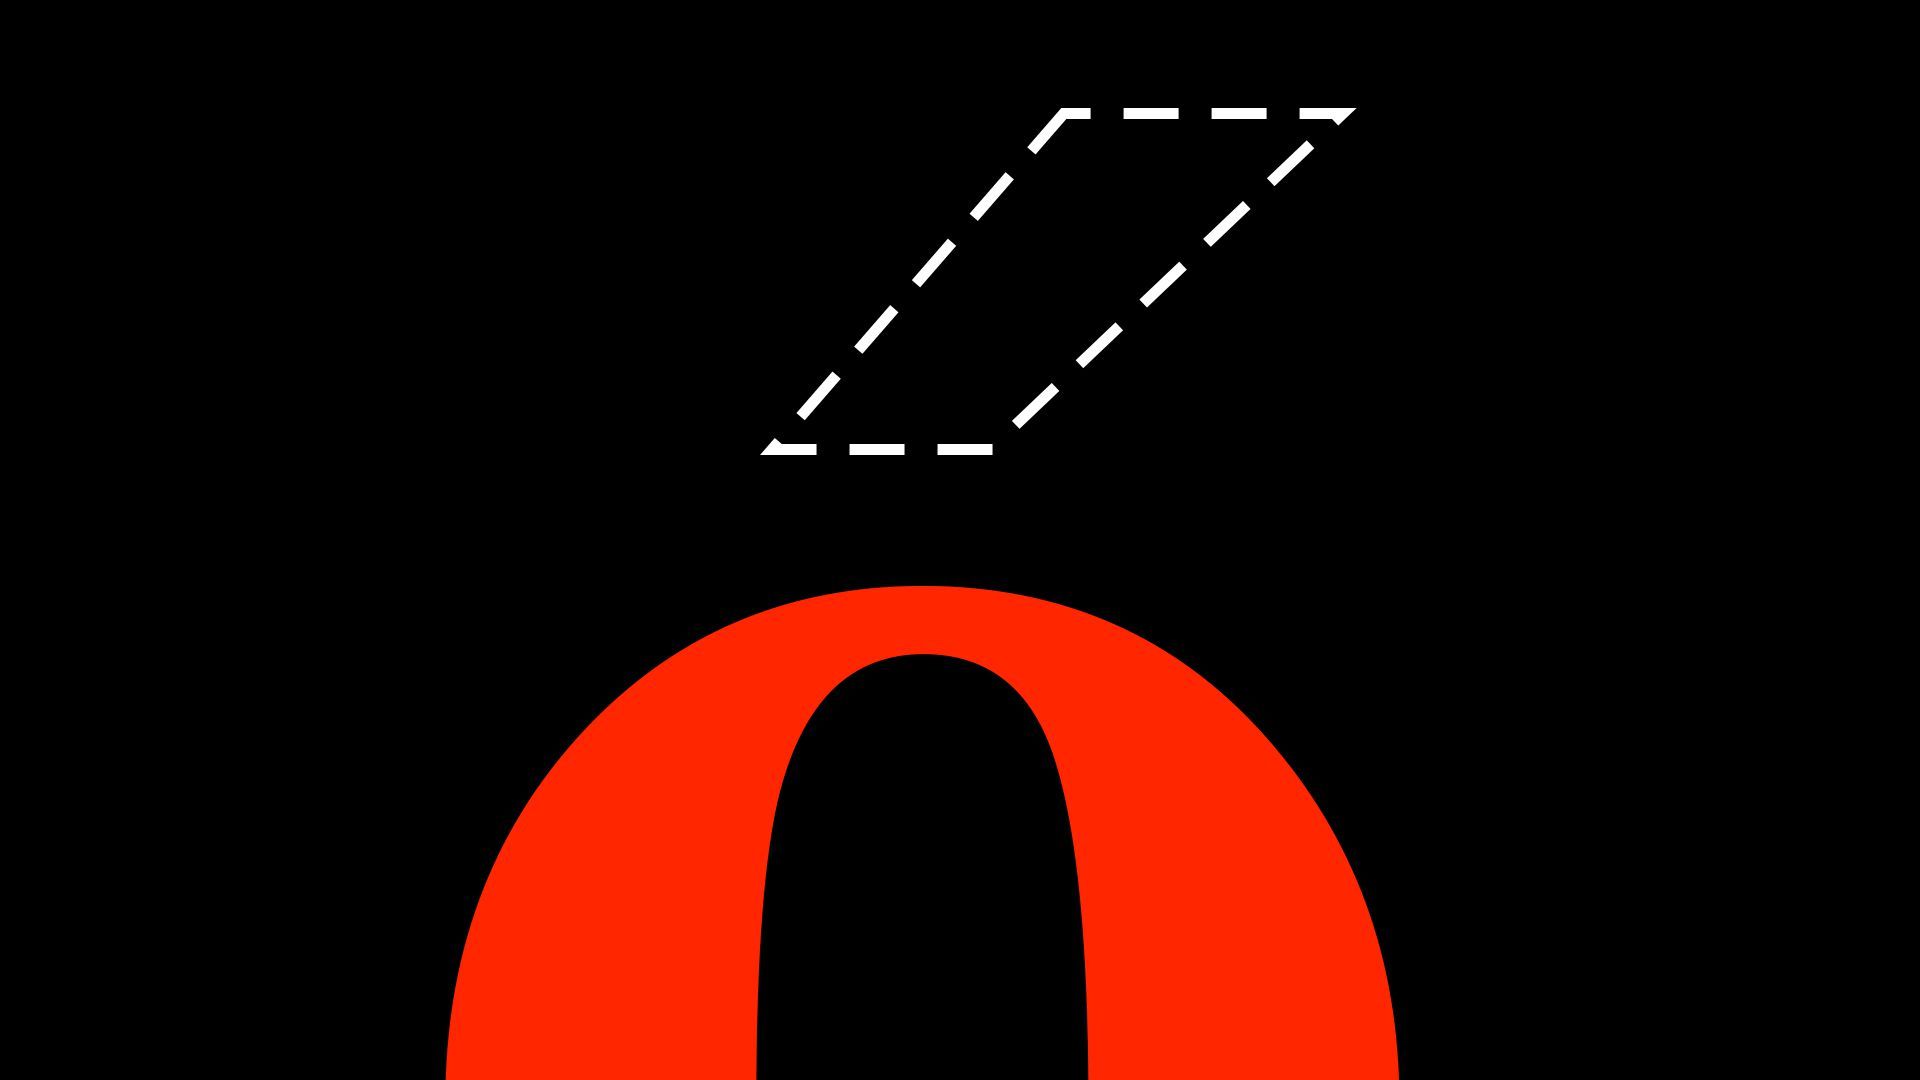 Illustration of a letter o with a missing accent mark indicated by a dotted line.